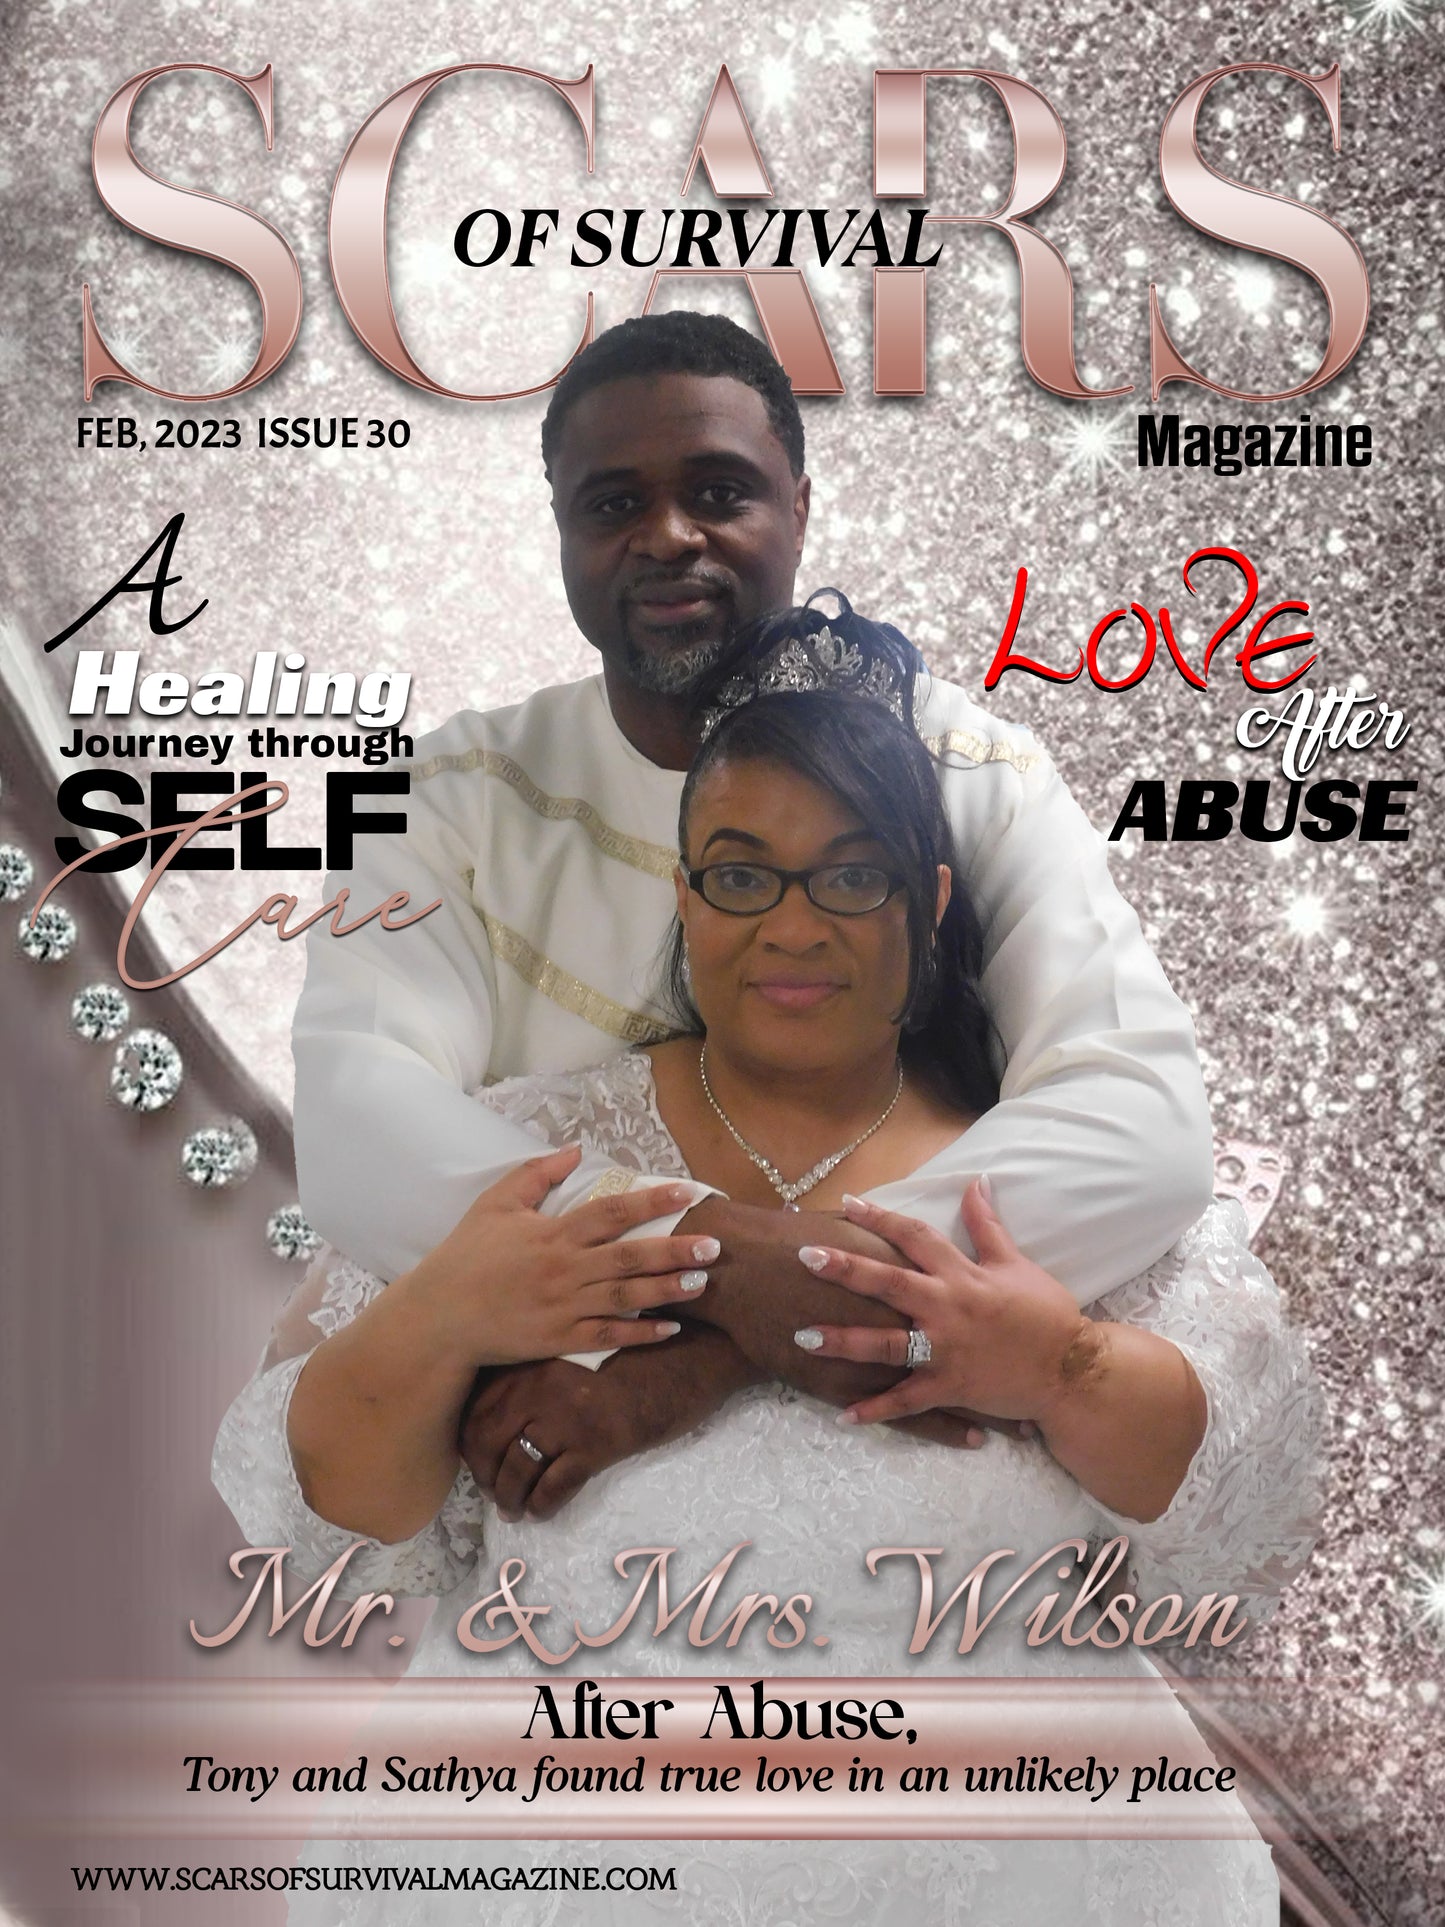 FEBRUARY 2023 ISSUE 30- AFTER ABUSE, TONY AND SATHYA FOUND TRUE LOVE IN AN UNLIKELY PLACE- MR AND MRS WILSON